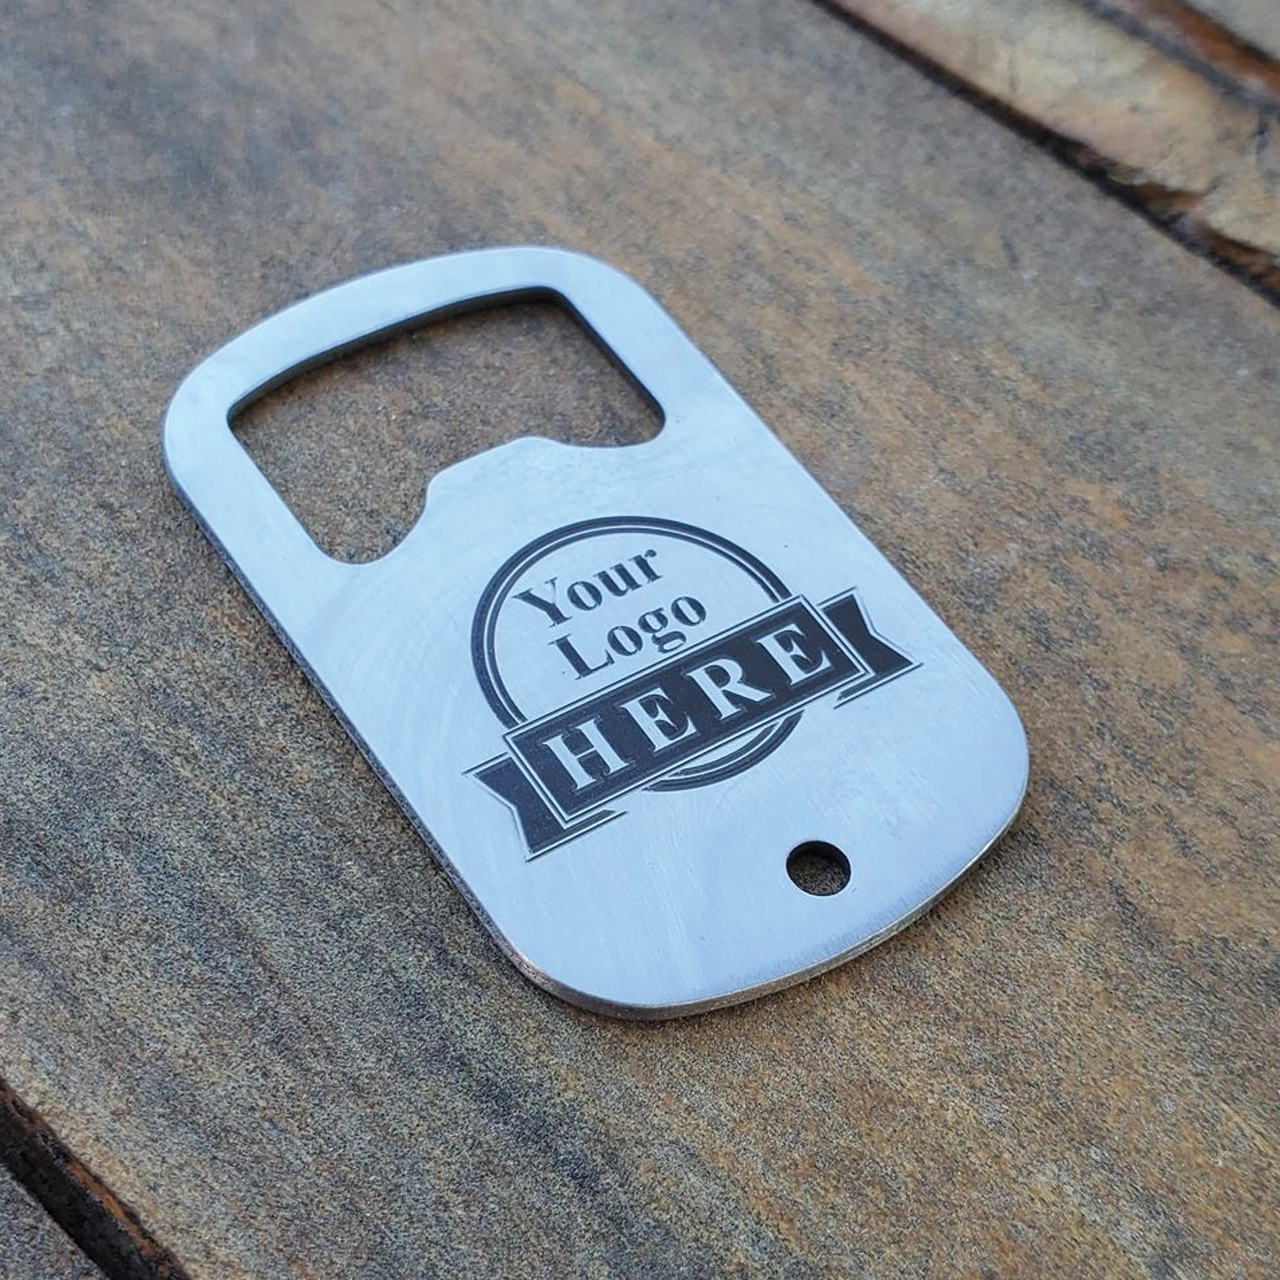 Personalized Minimalist Dog ID Bottle Opener Tag Business Keychain Stainless Steel Custom Laser Engraved Pocket Bottle Opener, Personalized, Minimalist, Bottle, Opener, Business, DogTag, Keychain, Stainless Steel, Custom, Laser Engraved, Pocket